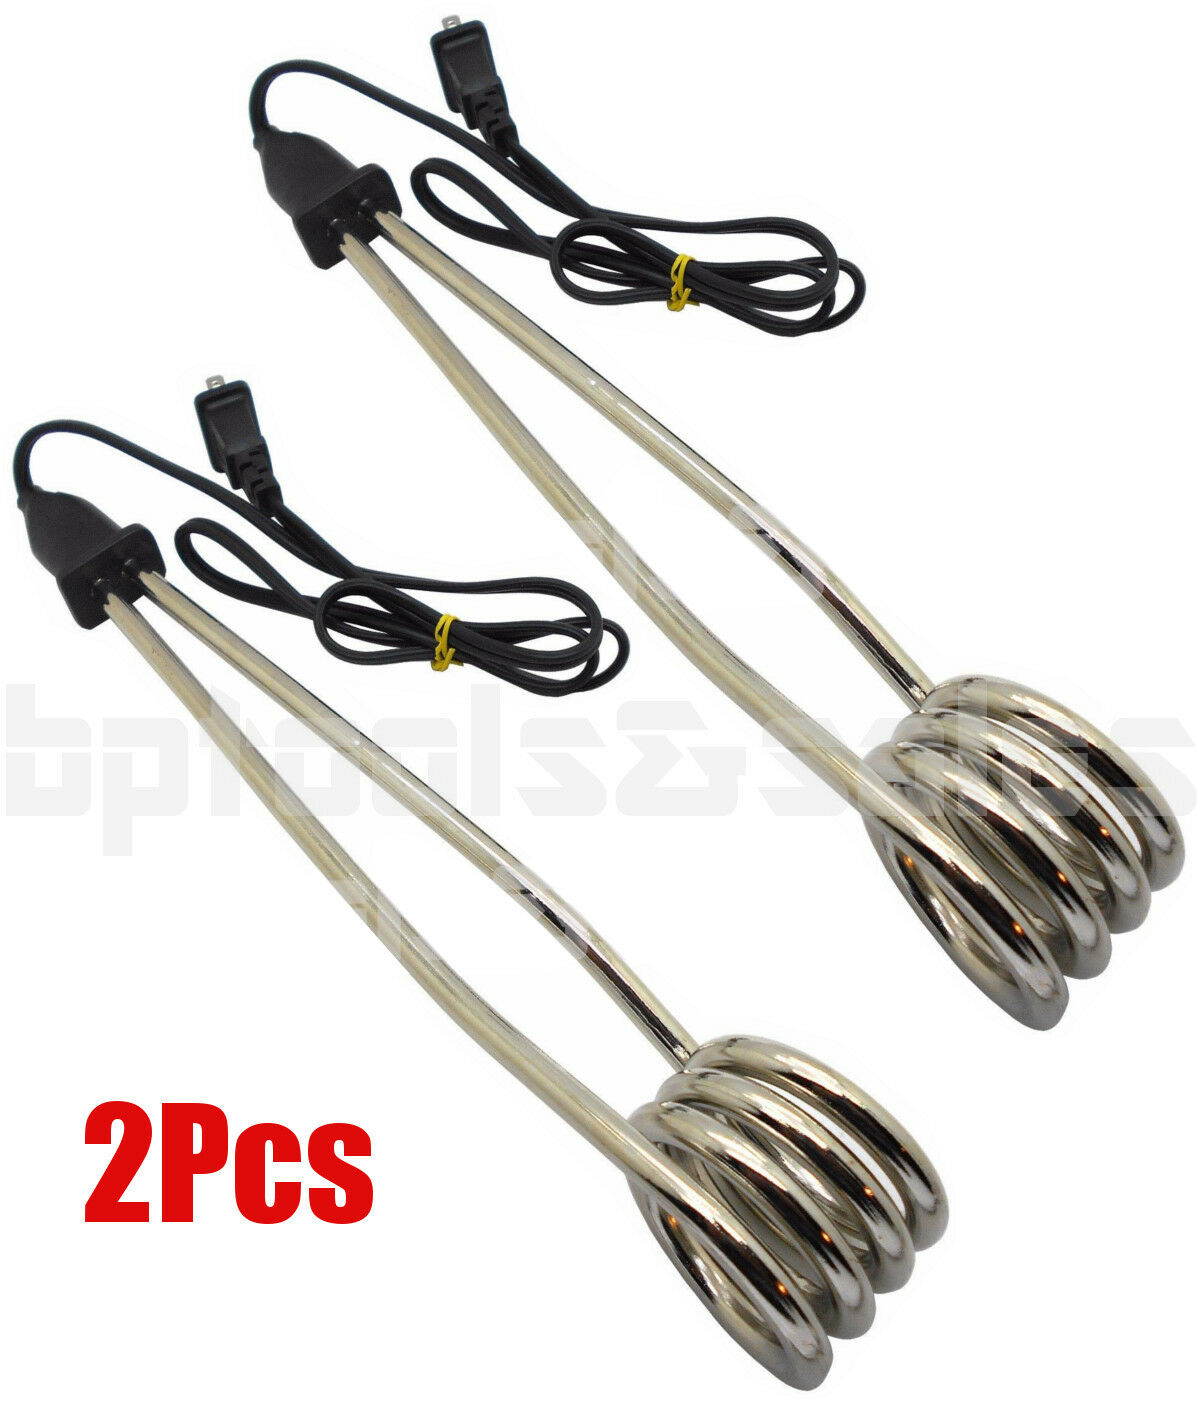 (2) 110v-1350w Water Heater Portable Electric Immersion Element Boiler Travel